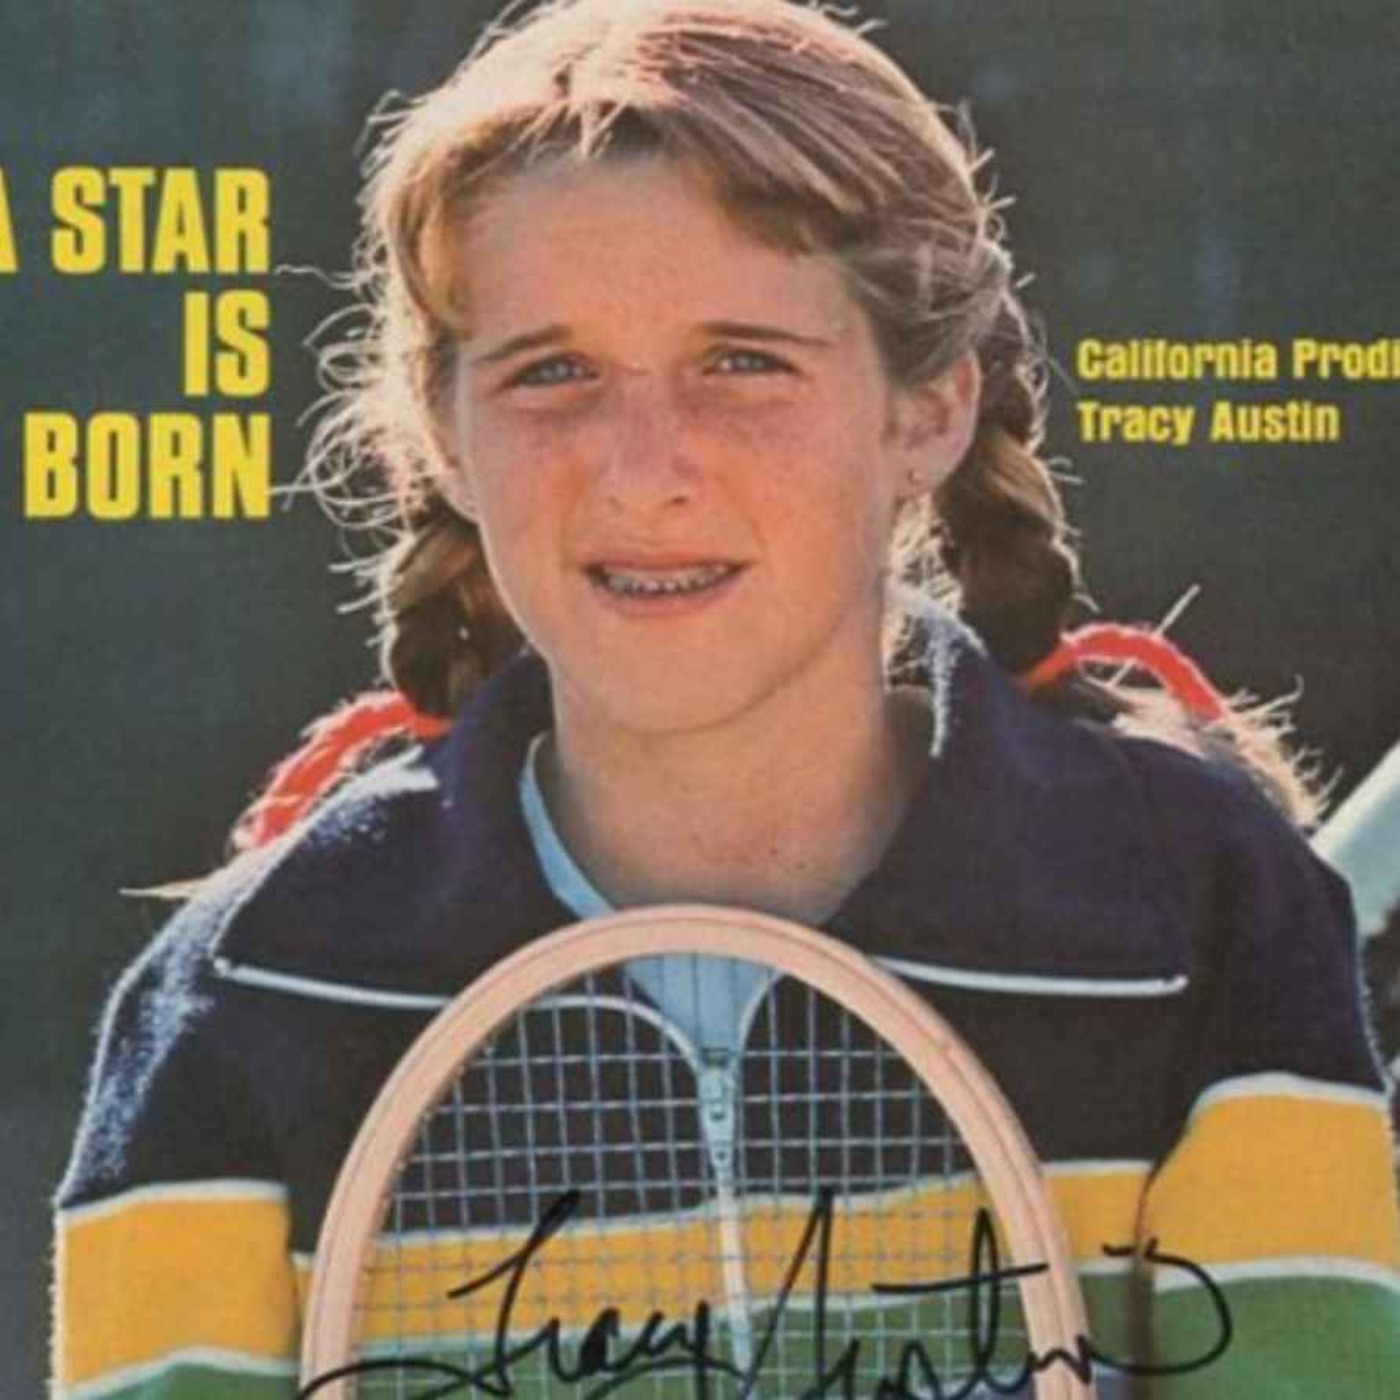 World #1 and Hall of Famer Tracy Austin